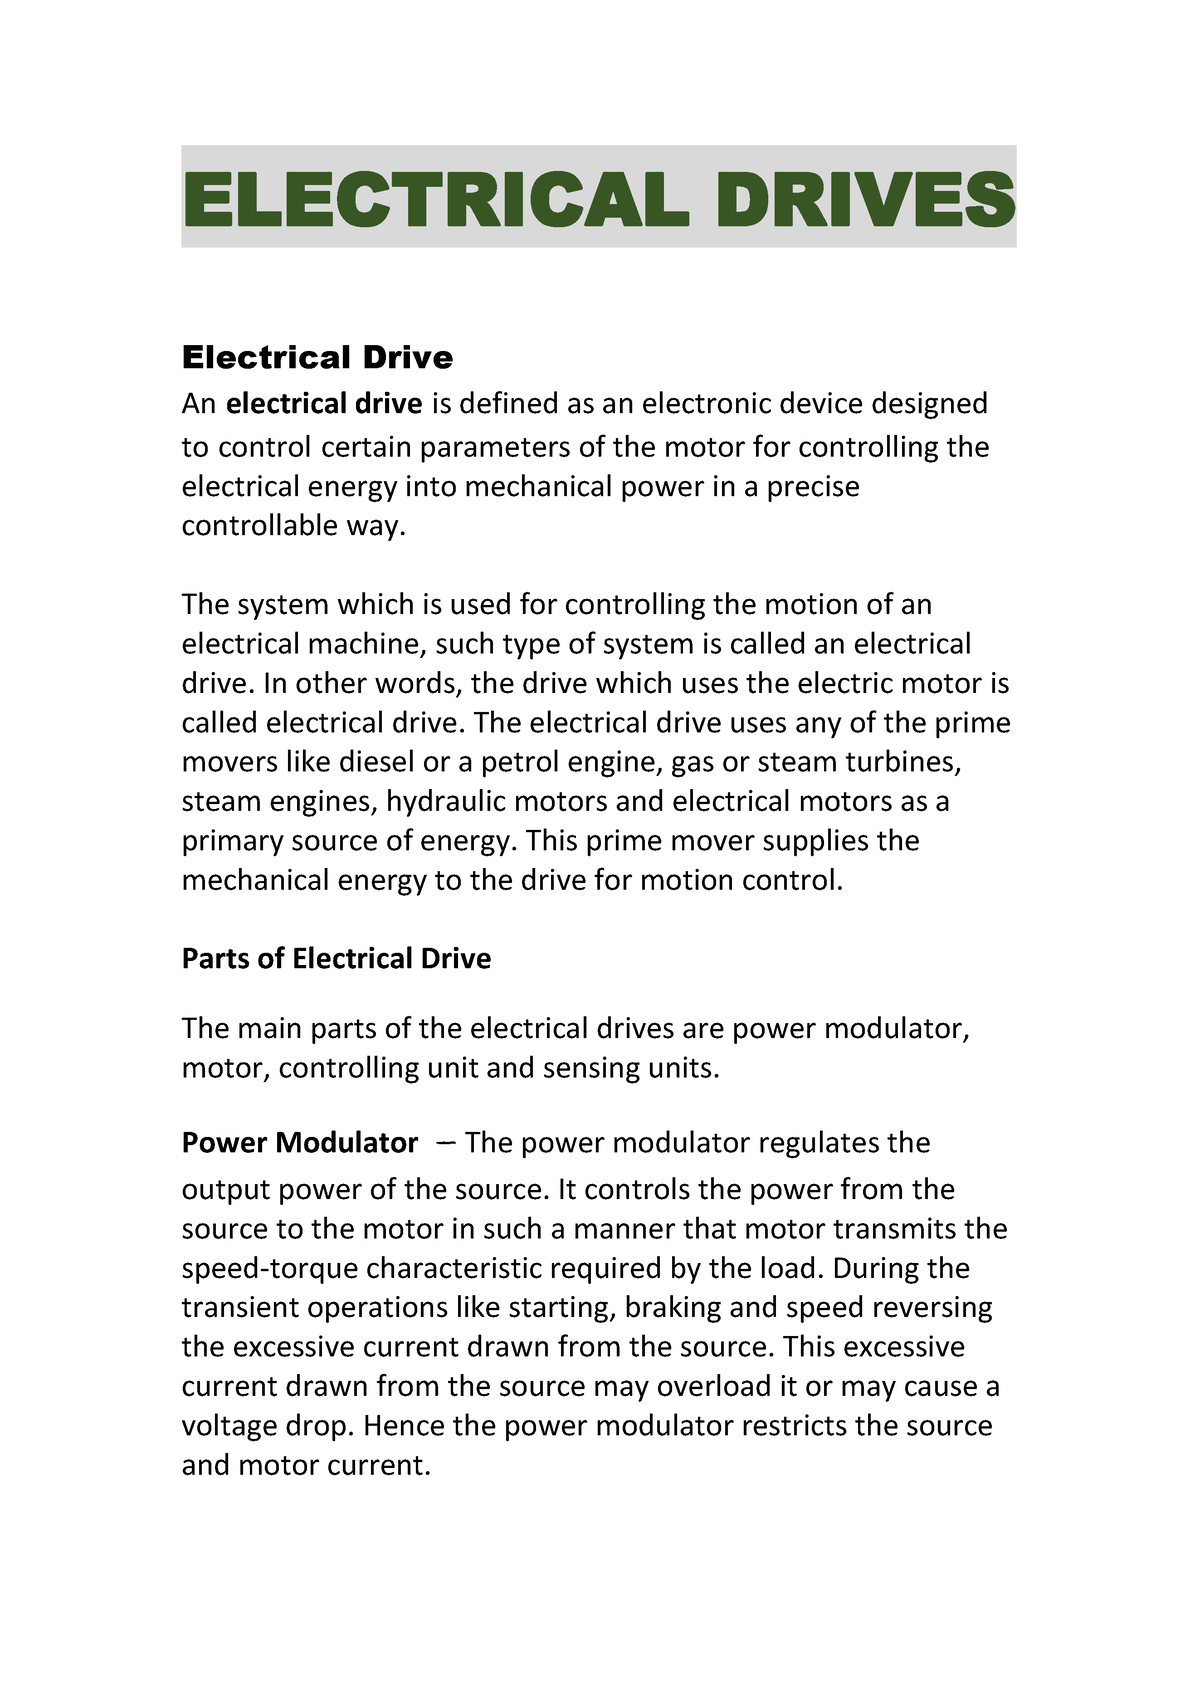 Electric Drive Lecture Notes ELECTRICAL DRIVES Electrical Drive An